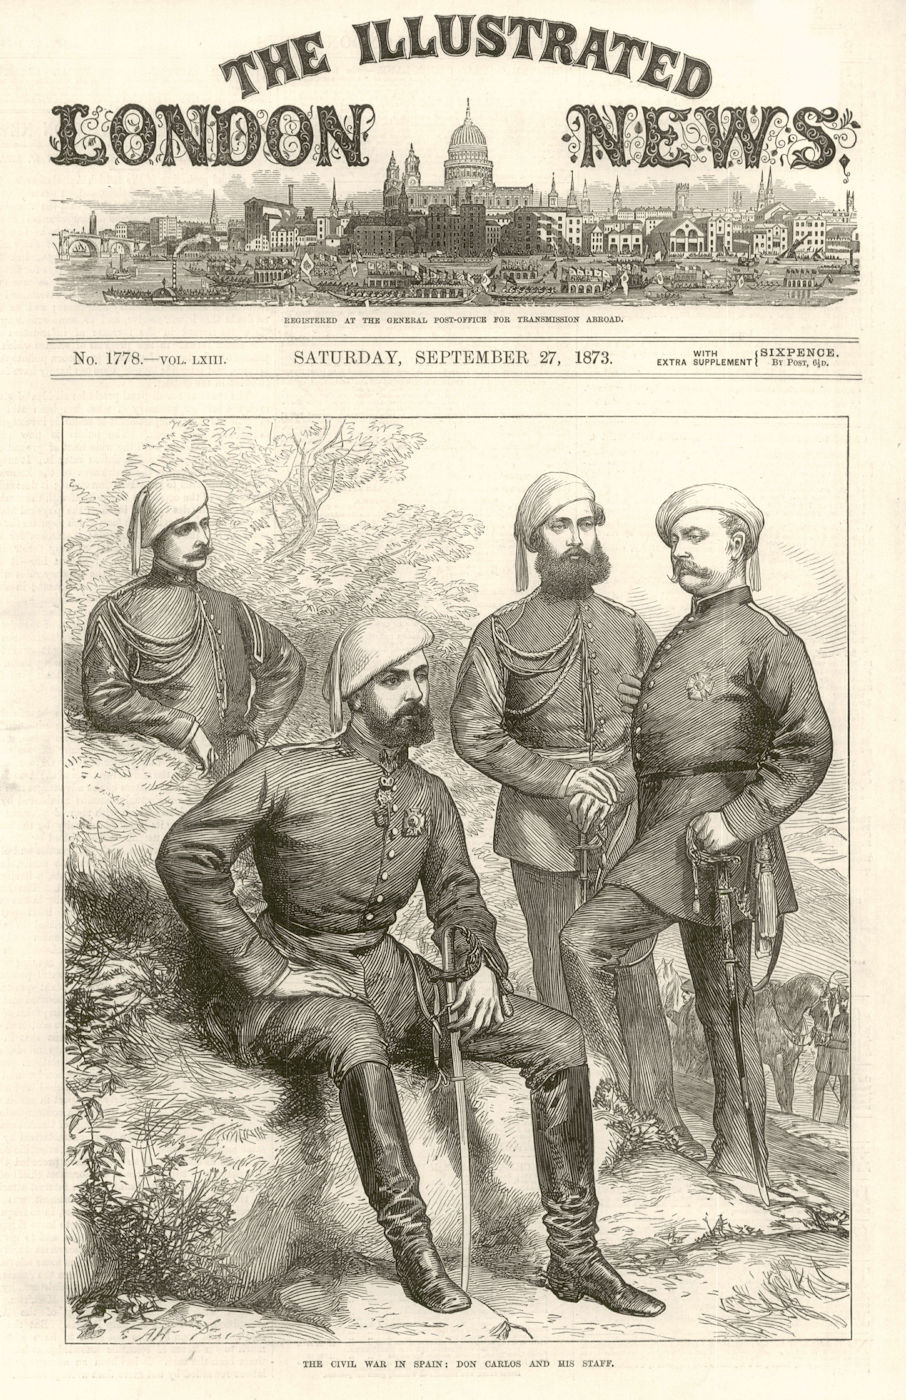 Associate Product The Civil War in Spain: Don Carlos & his Staff. First Spanish Republic 1873